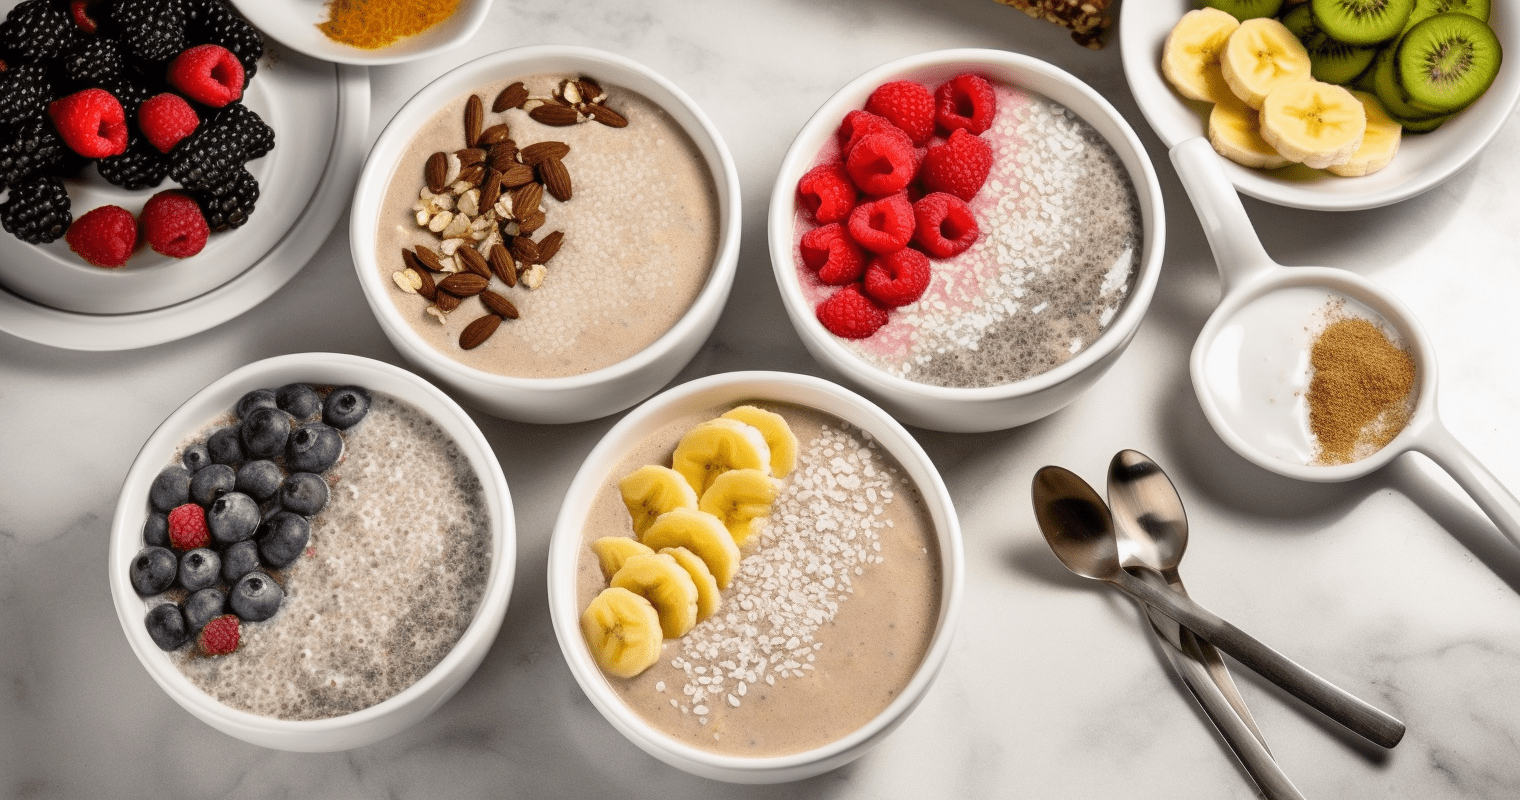 Chia Pudding Cooking Instructions